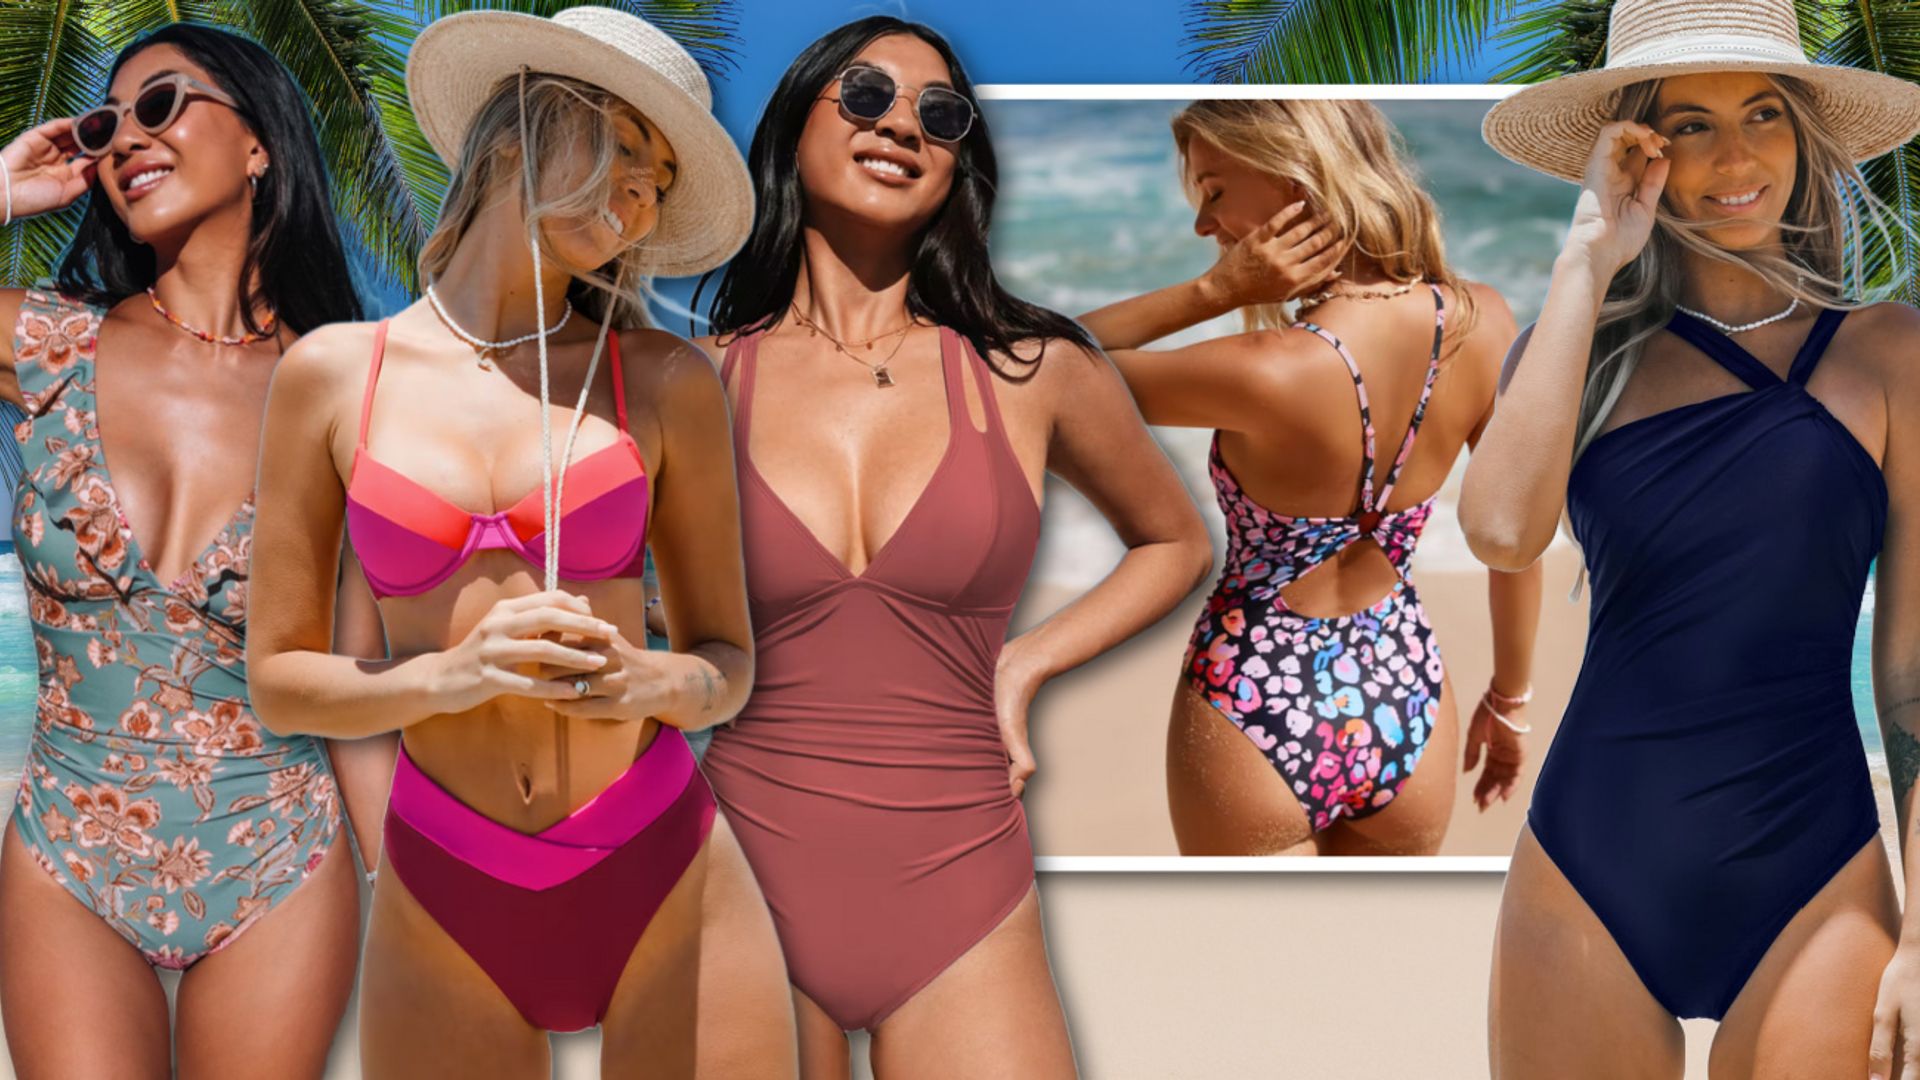 I searched Cupshe's trending swimsuits for the most flattering - these are my under-$38 picks for summer